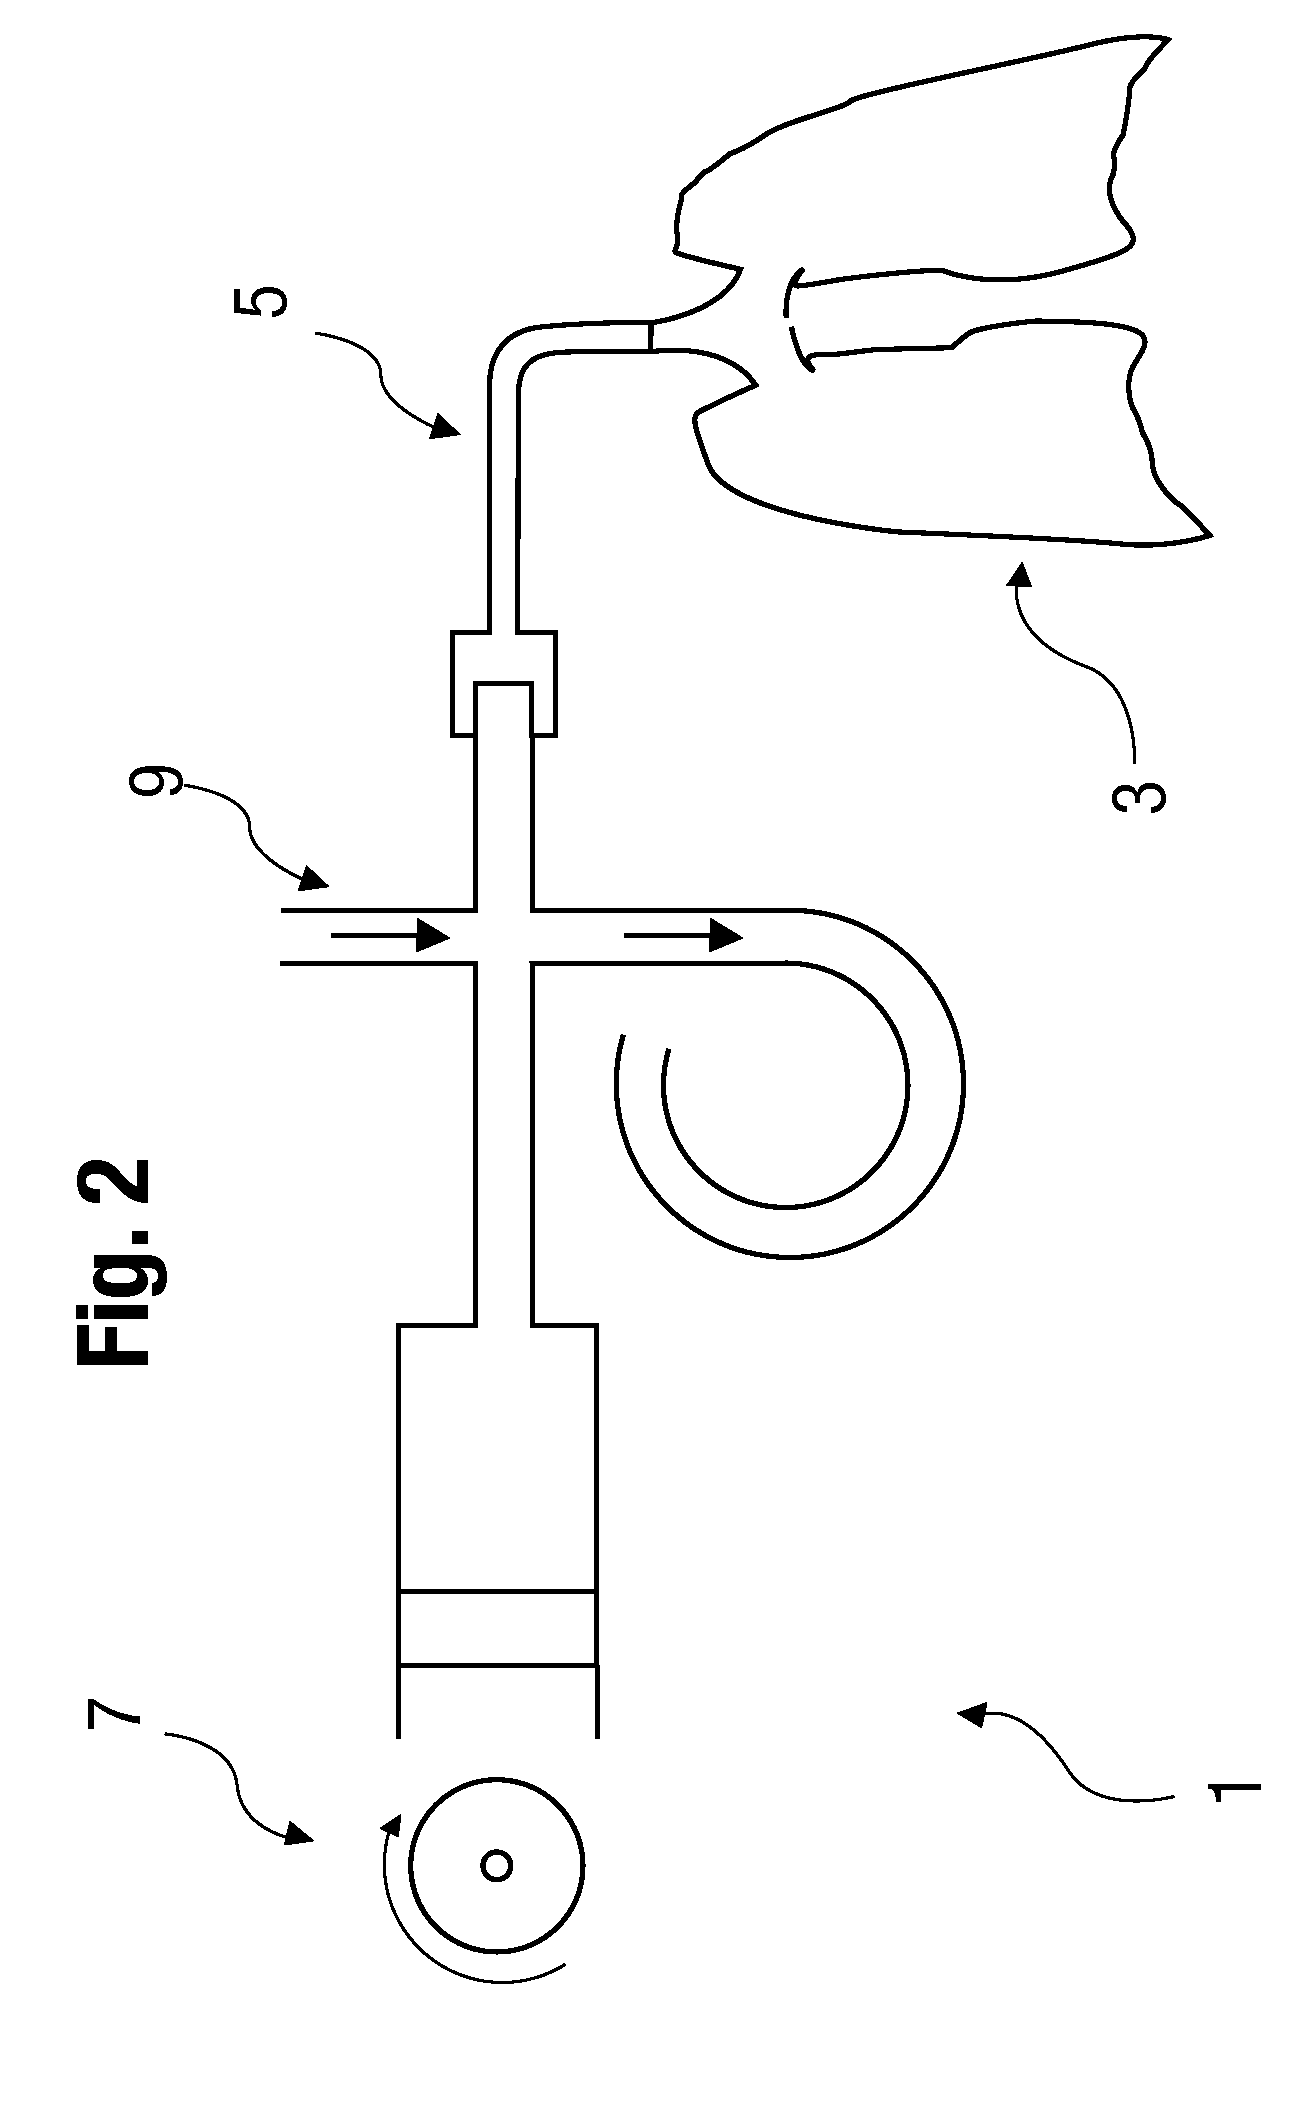 Device and method for respirating a patient by means of high-frequency ventilation